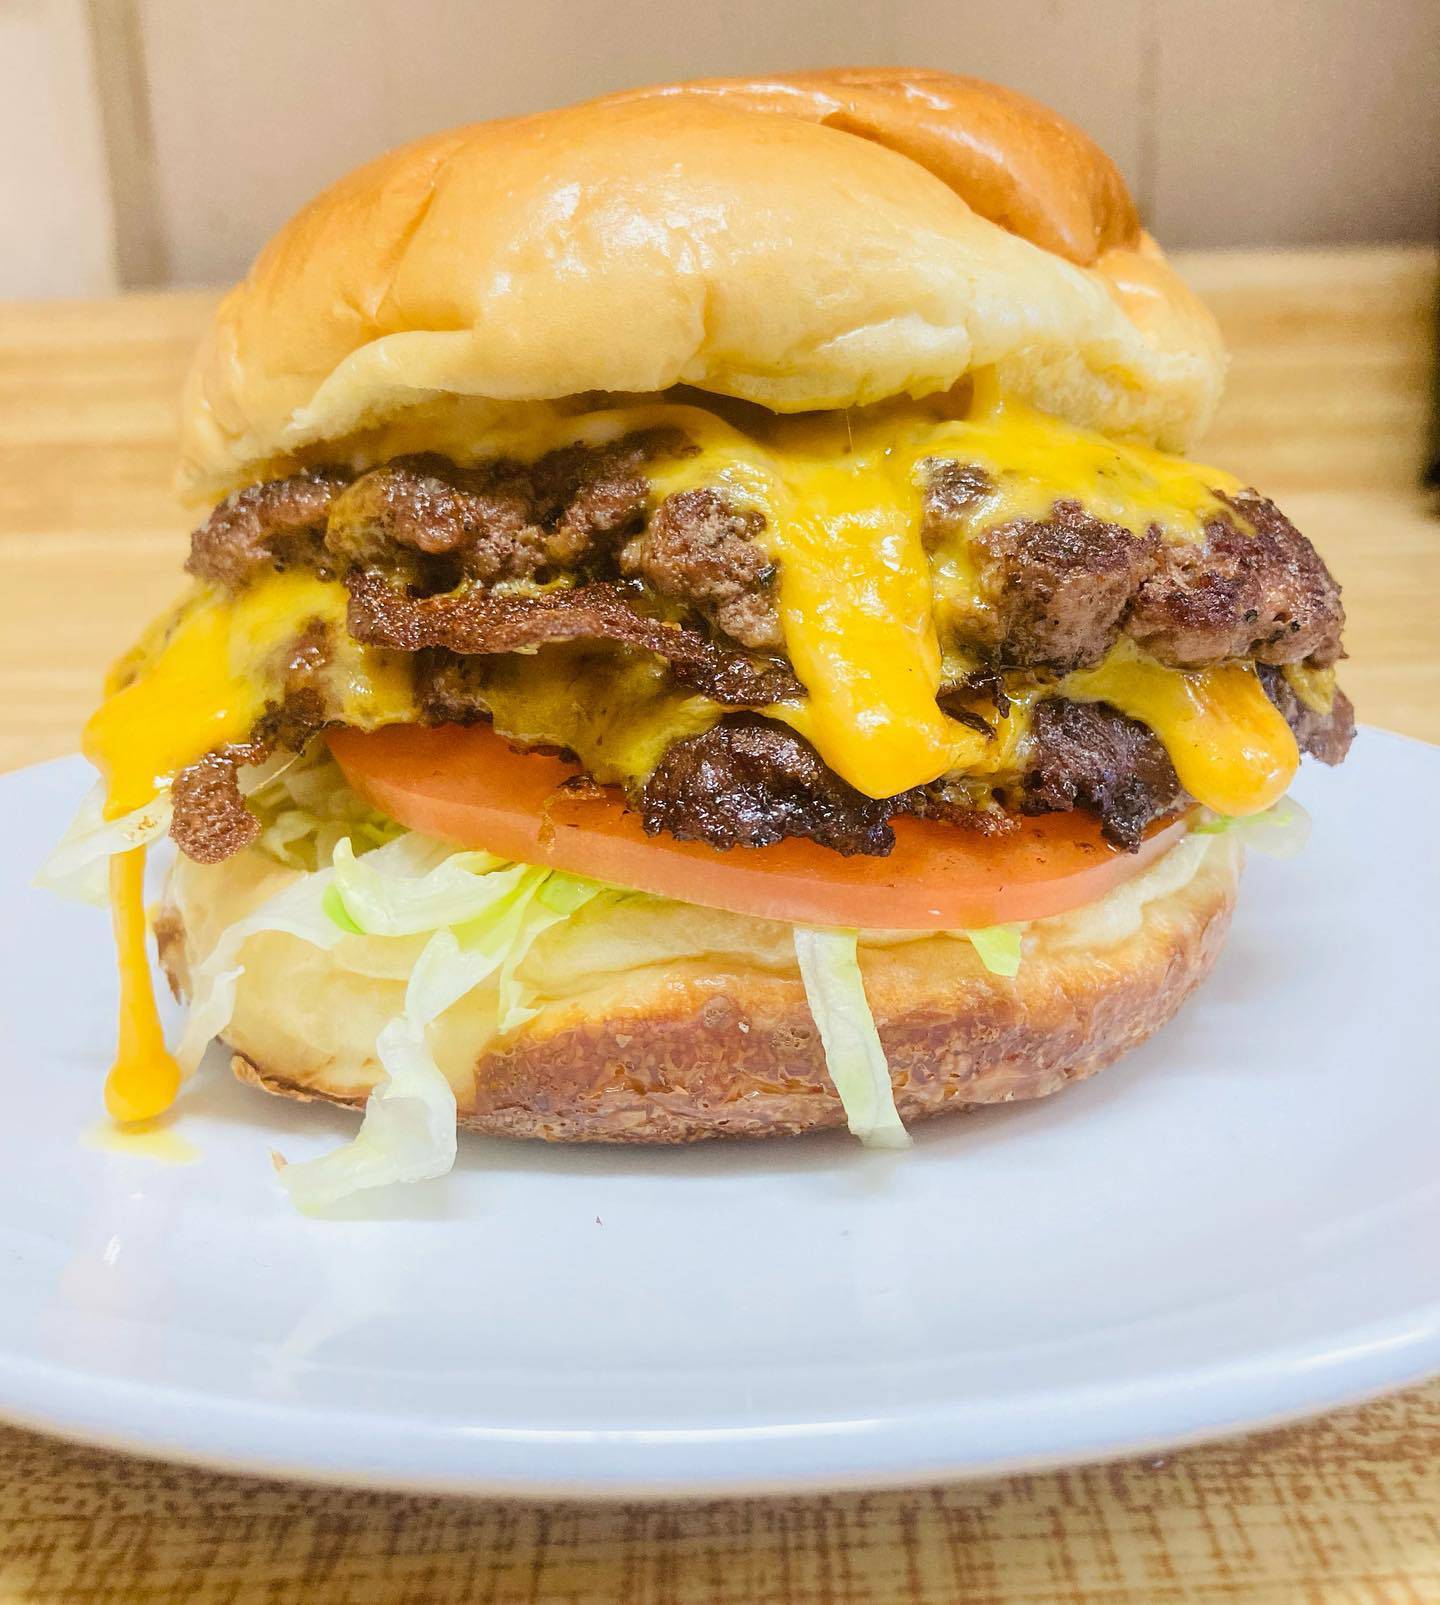 Pub 64 in Sycamore was named in the top 10 burger places in DeKalb County by readers in 2021.